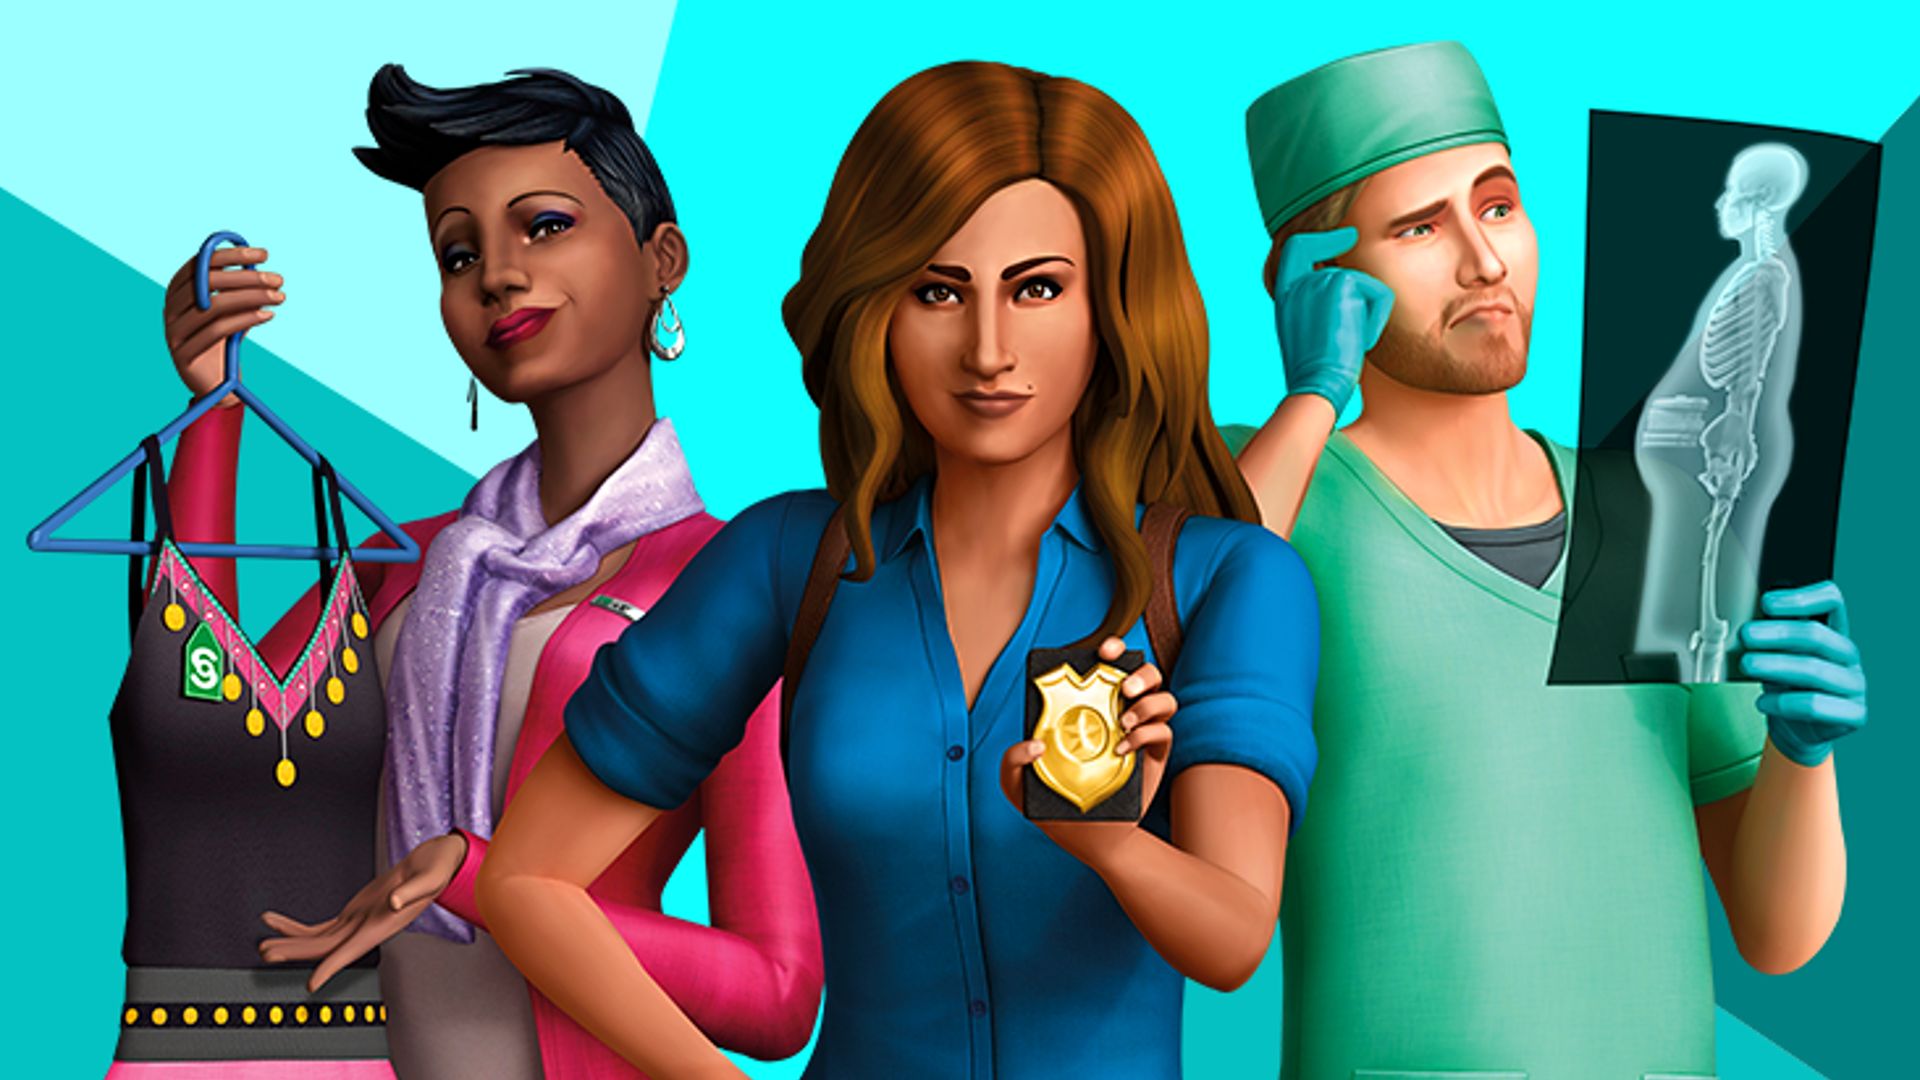 All the Sims 5 cheats we expect to see, from money to move objects